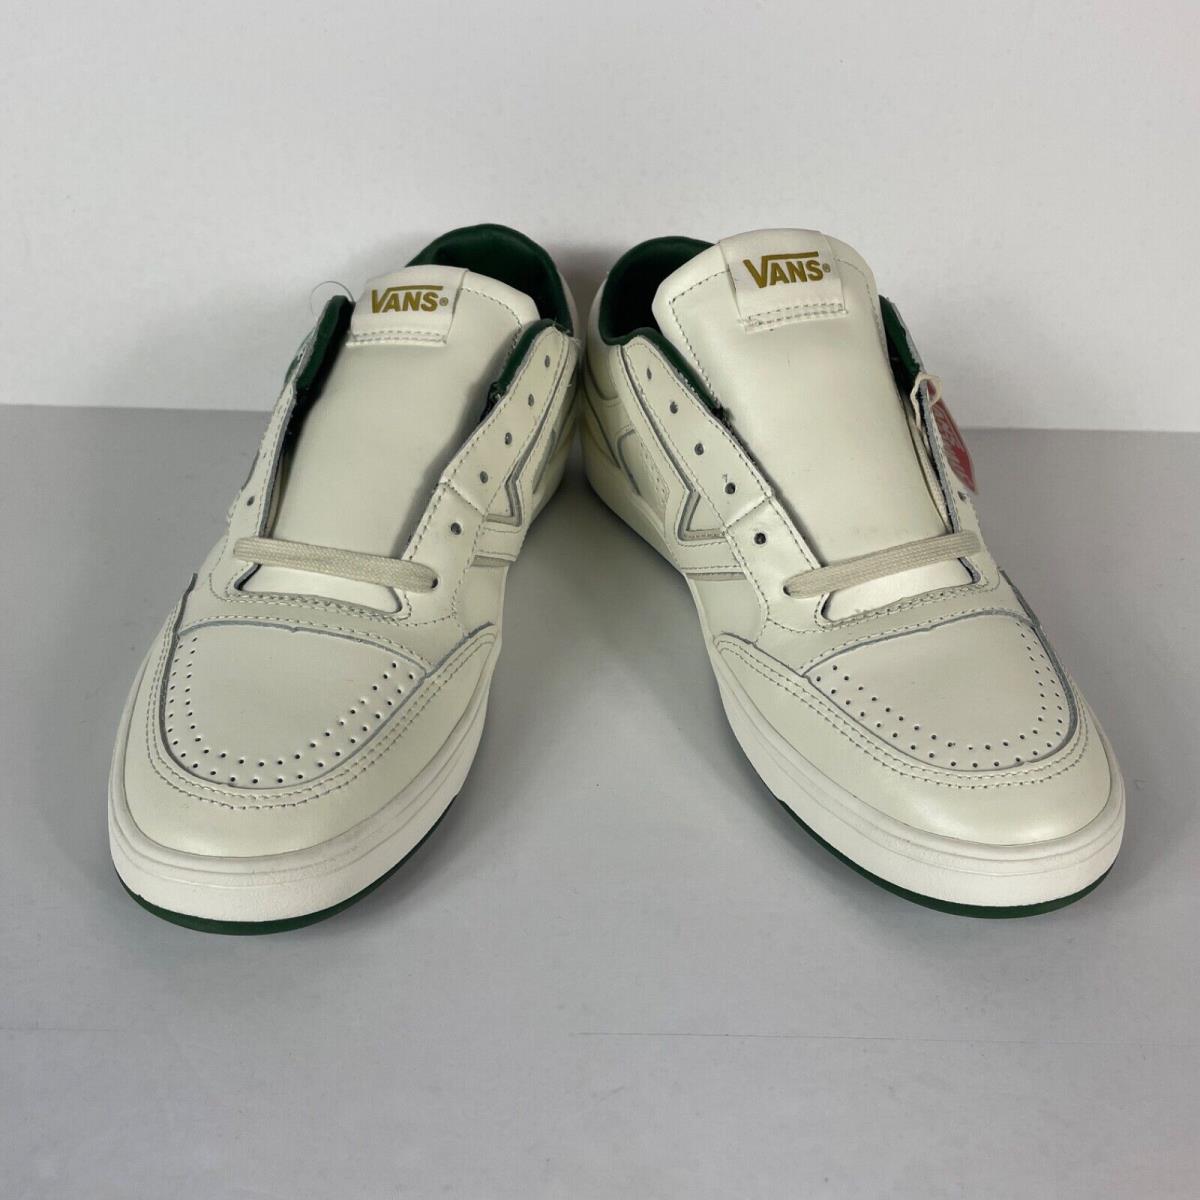 Vans shoes Lowland - White 4